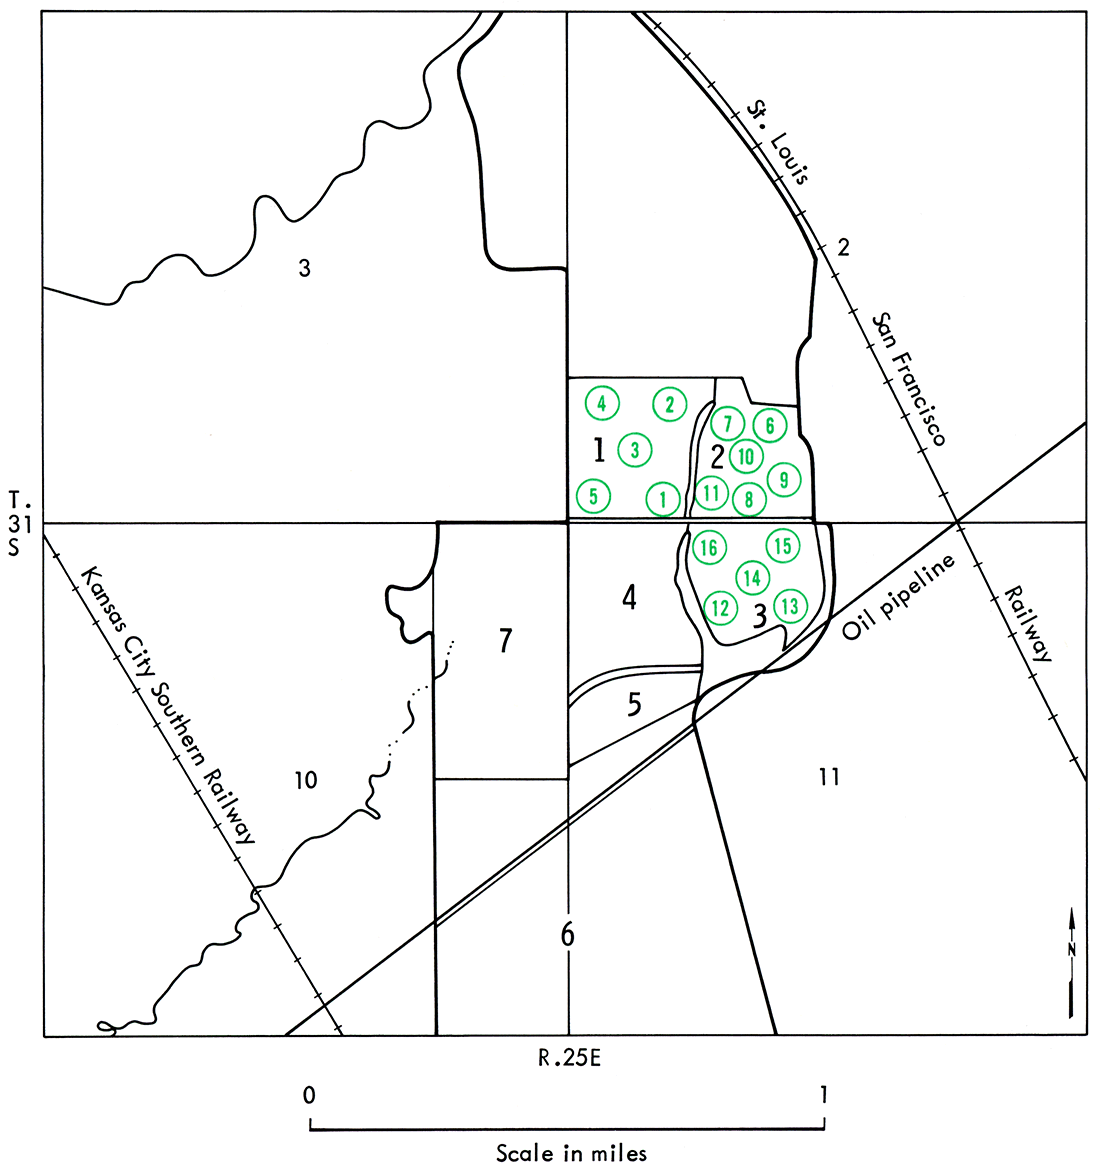 Map of location of soil samples taken to determine lime and fertilizer application pates. Data from Clemens Coal Company records.